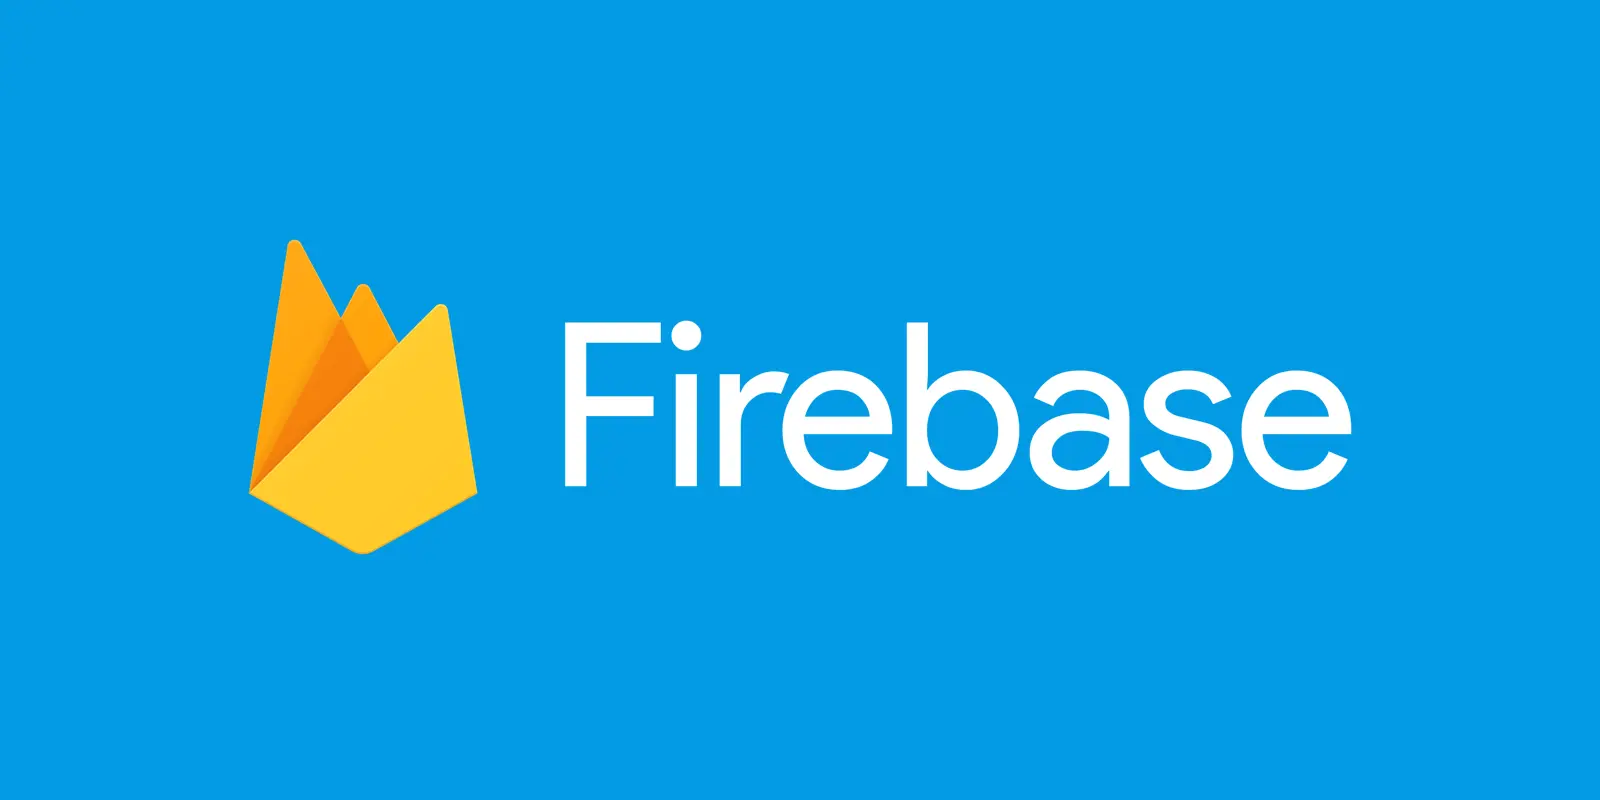 How to Optimize Firebase Services